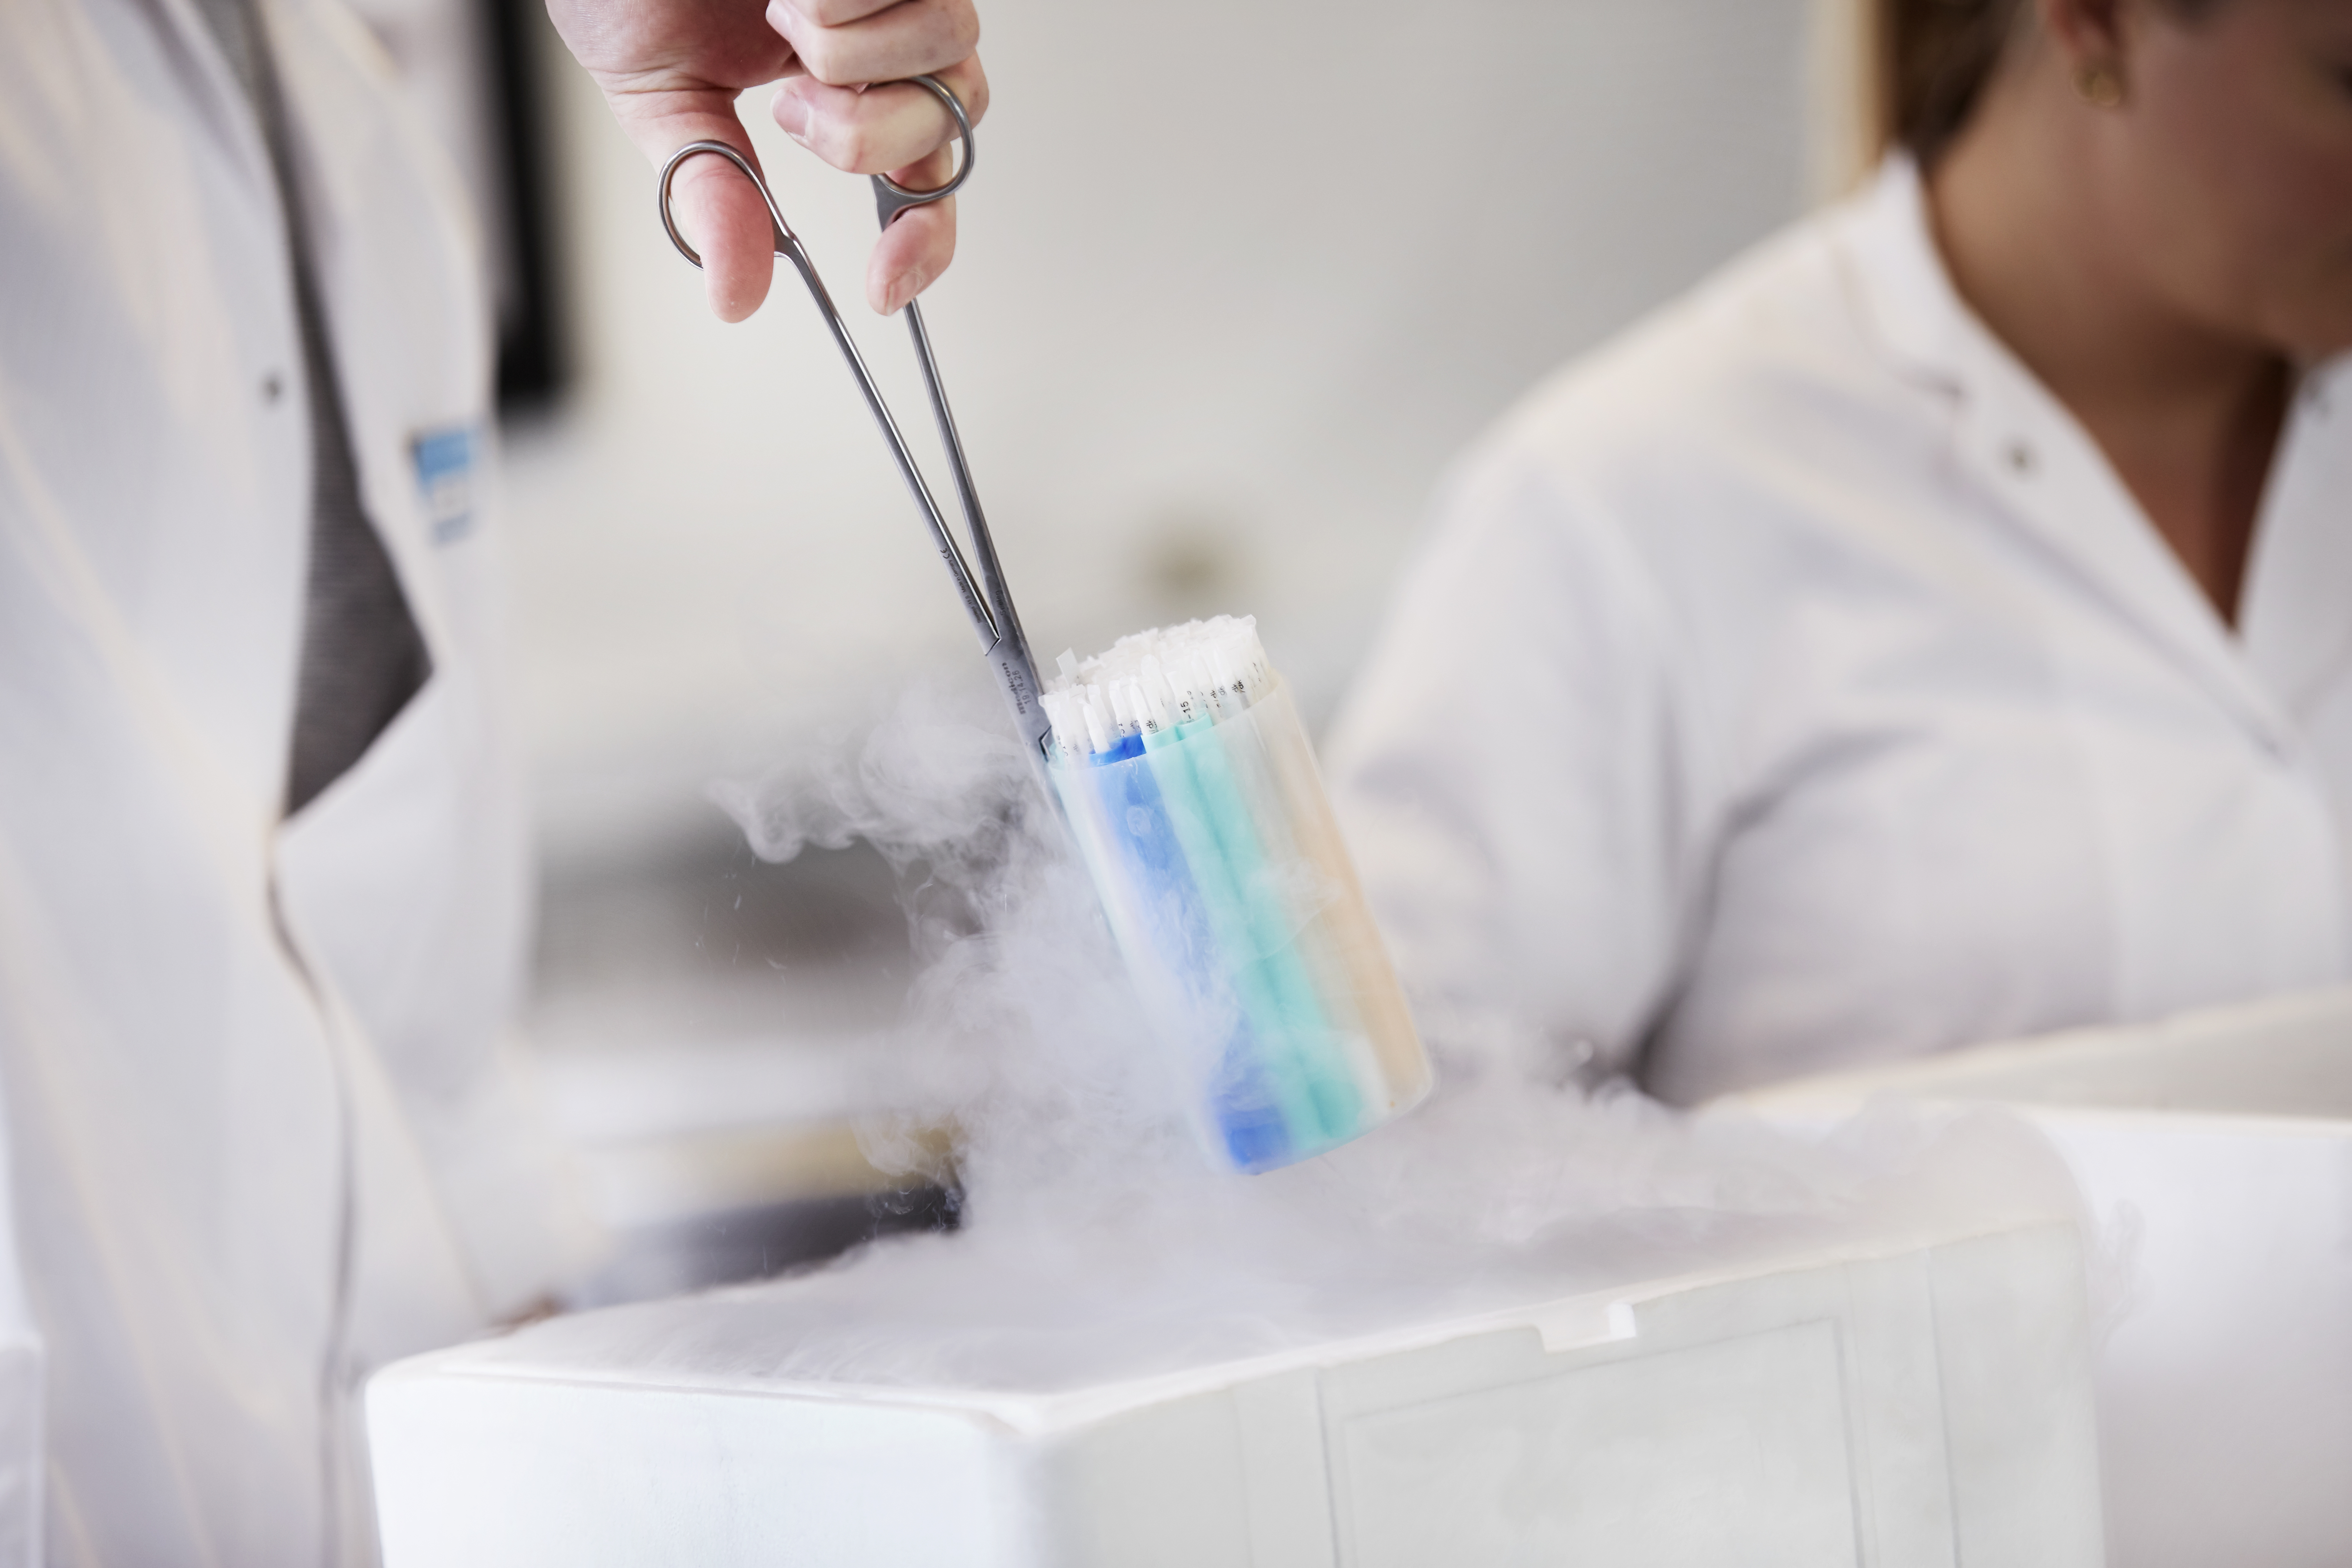  Frozen sperm straws after sperm donation at Cryos 